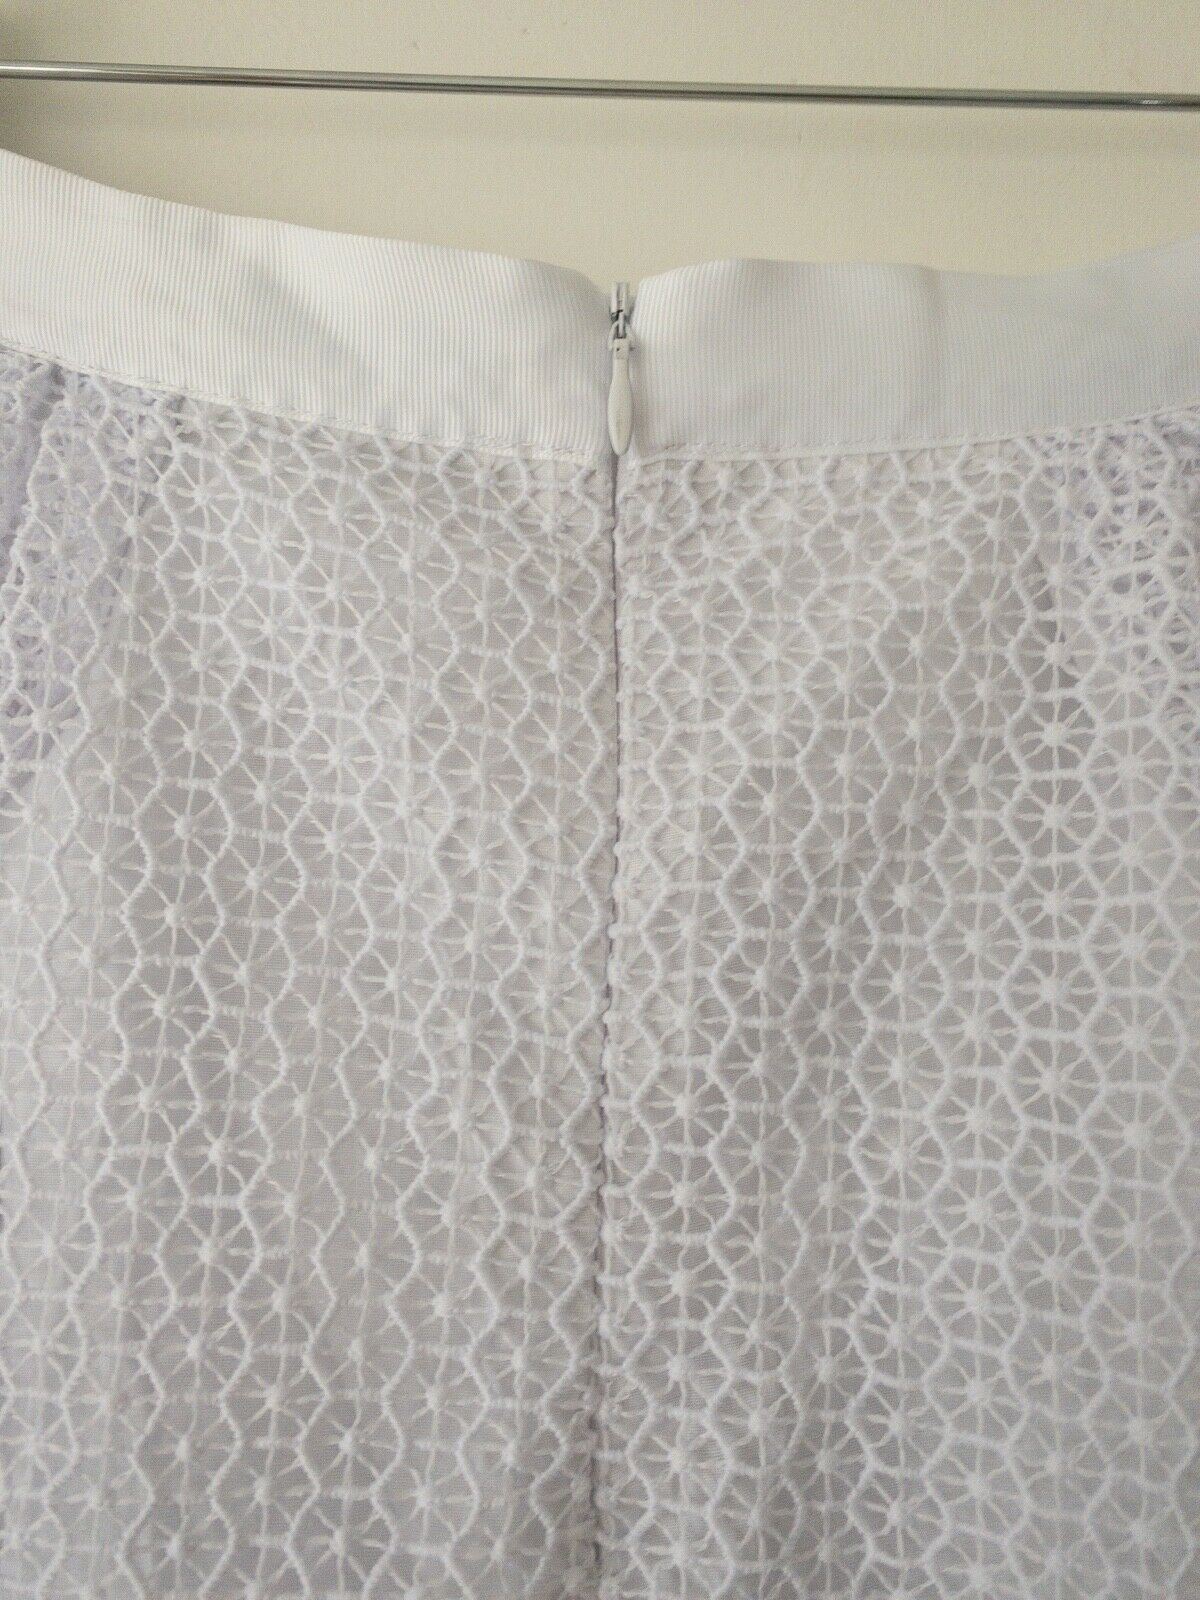 Mademoiselle R La Redoute White Layered Skirt Size 10 W28